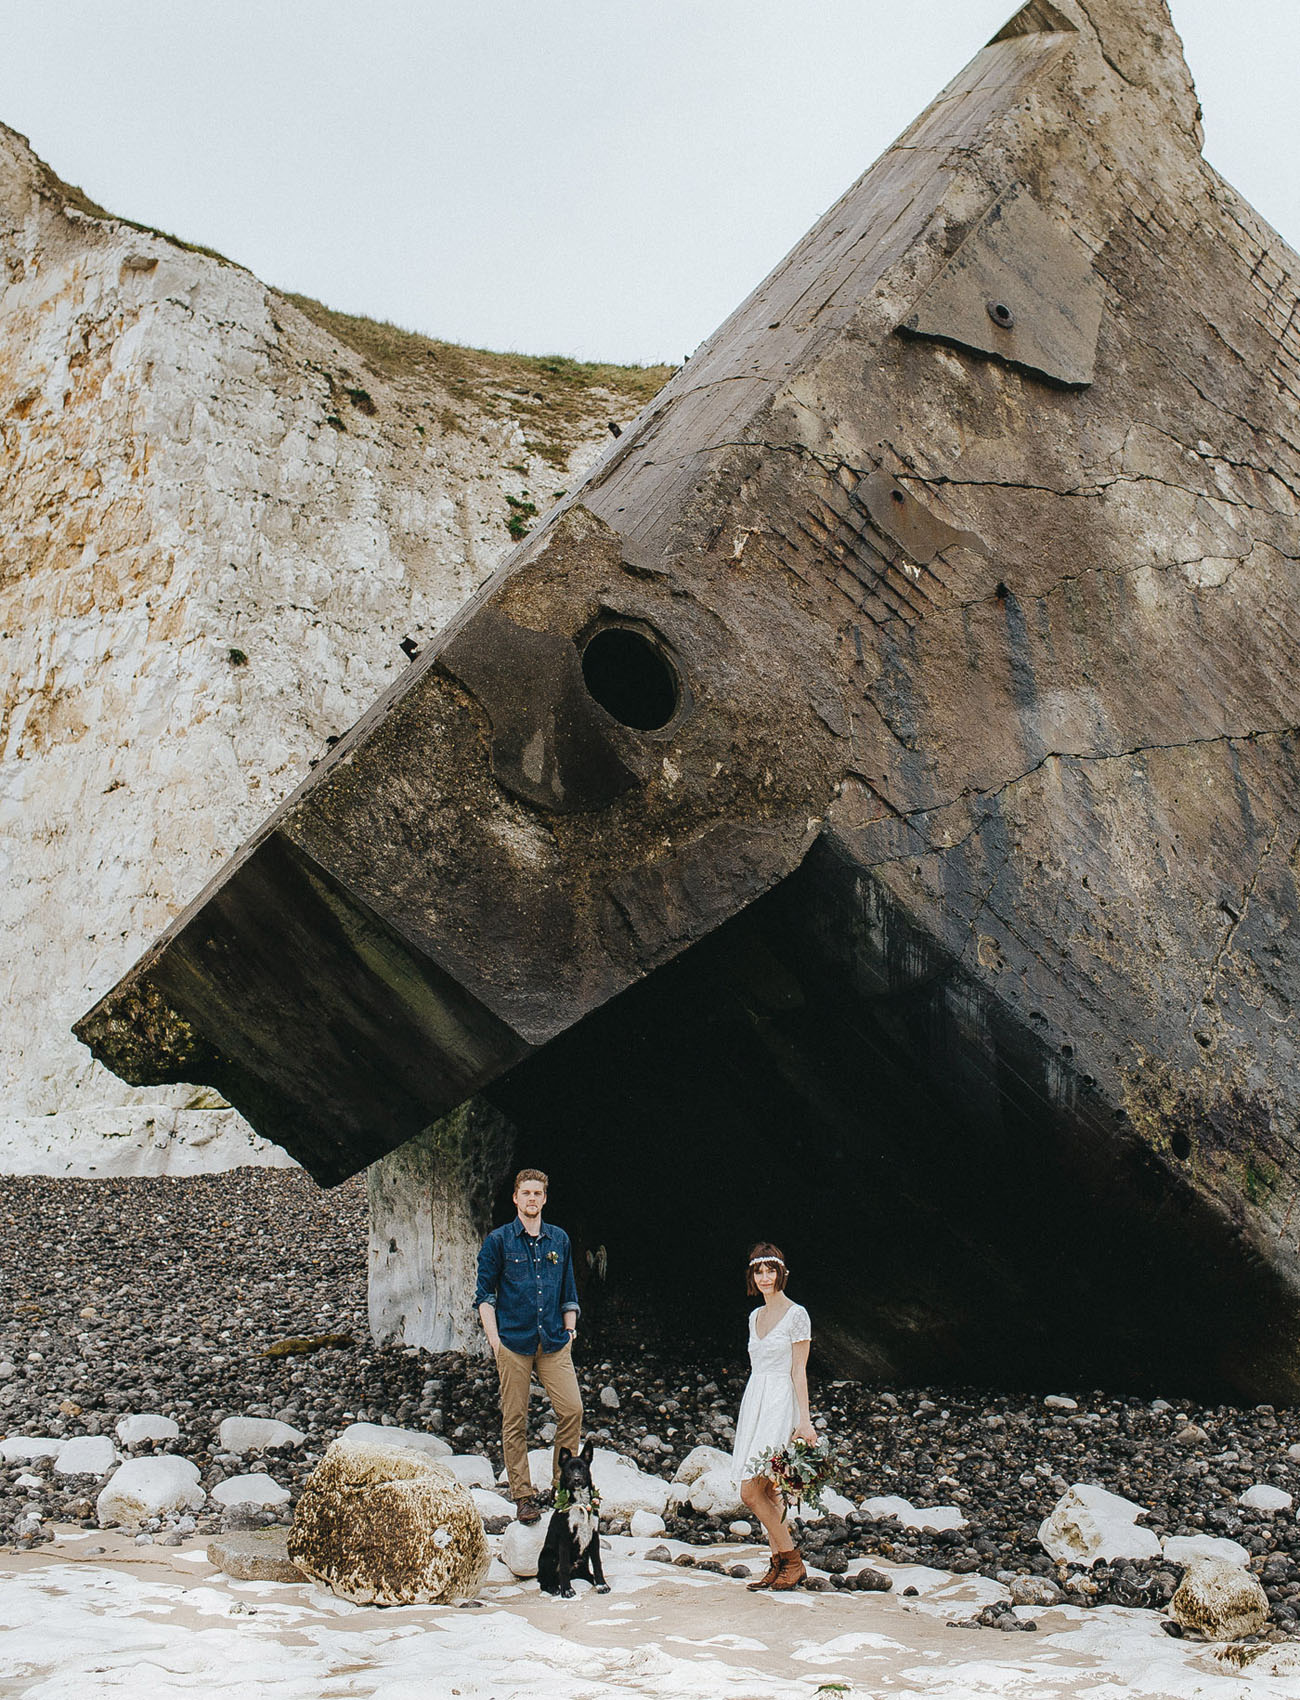 French Elopement